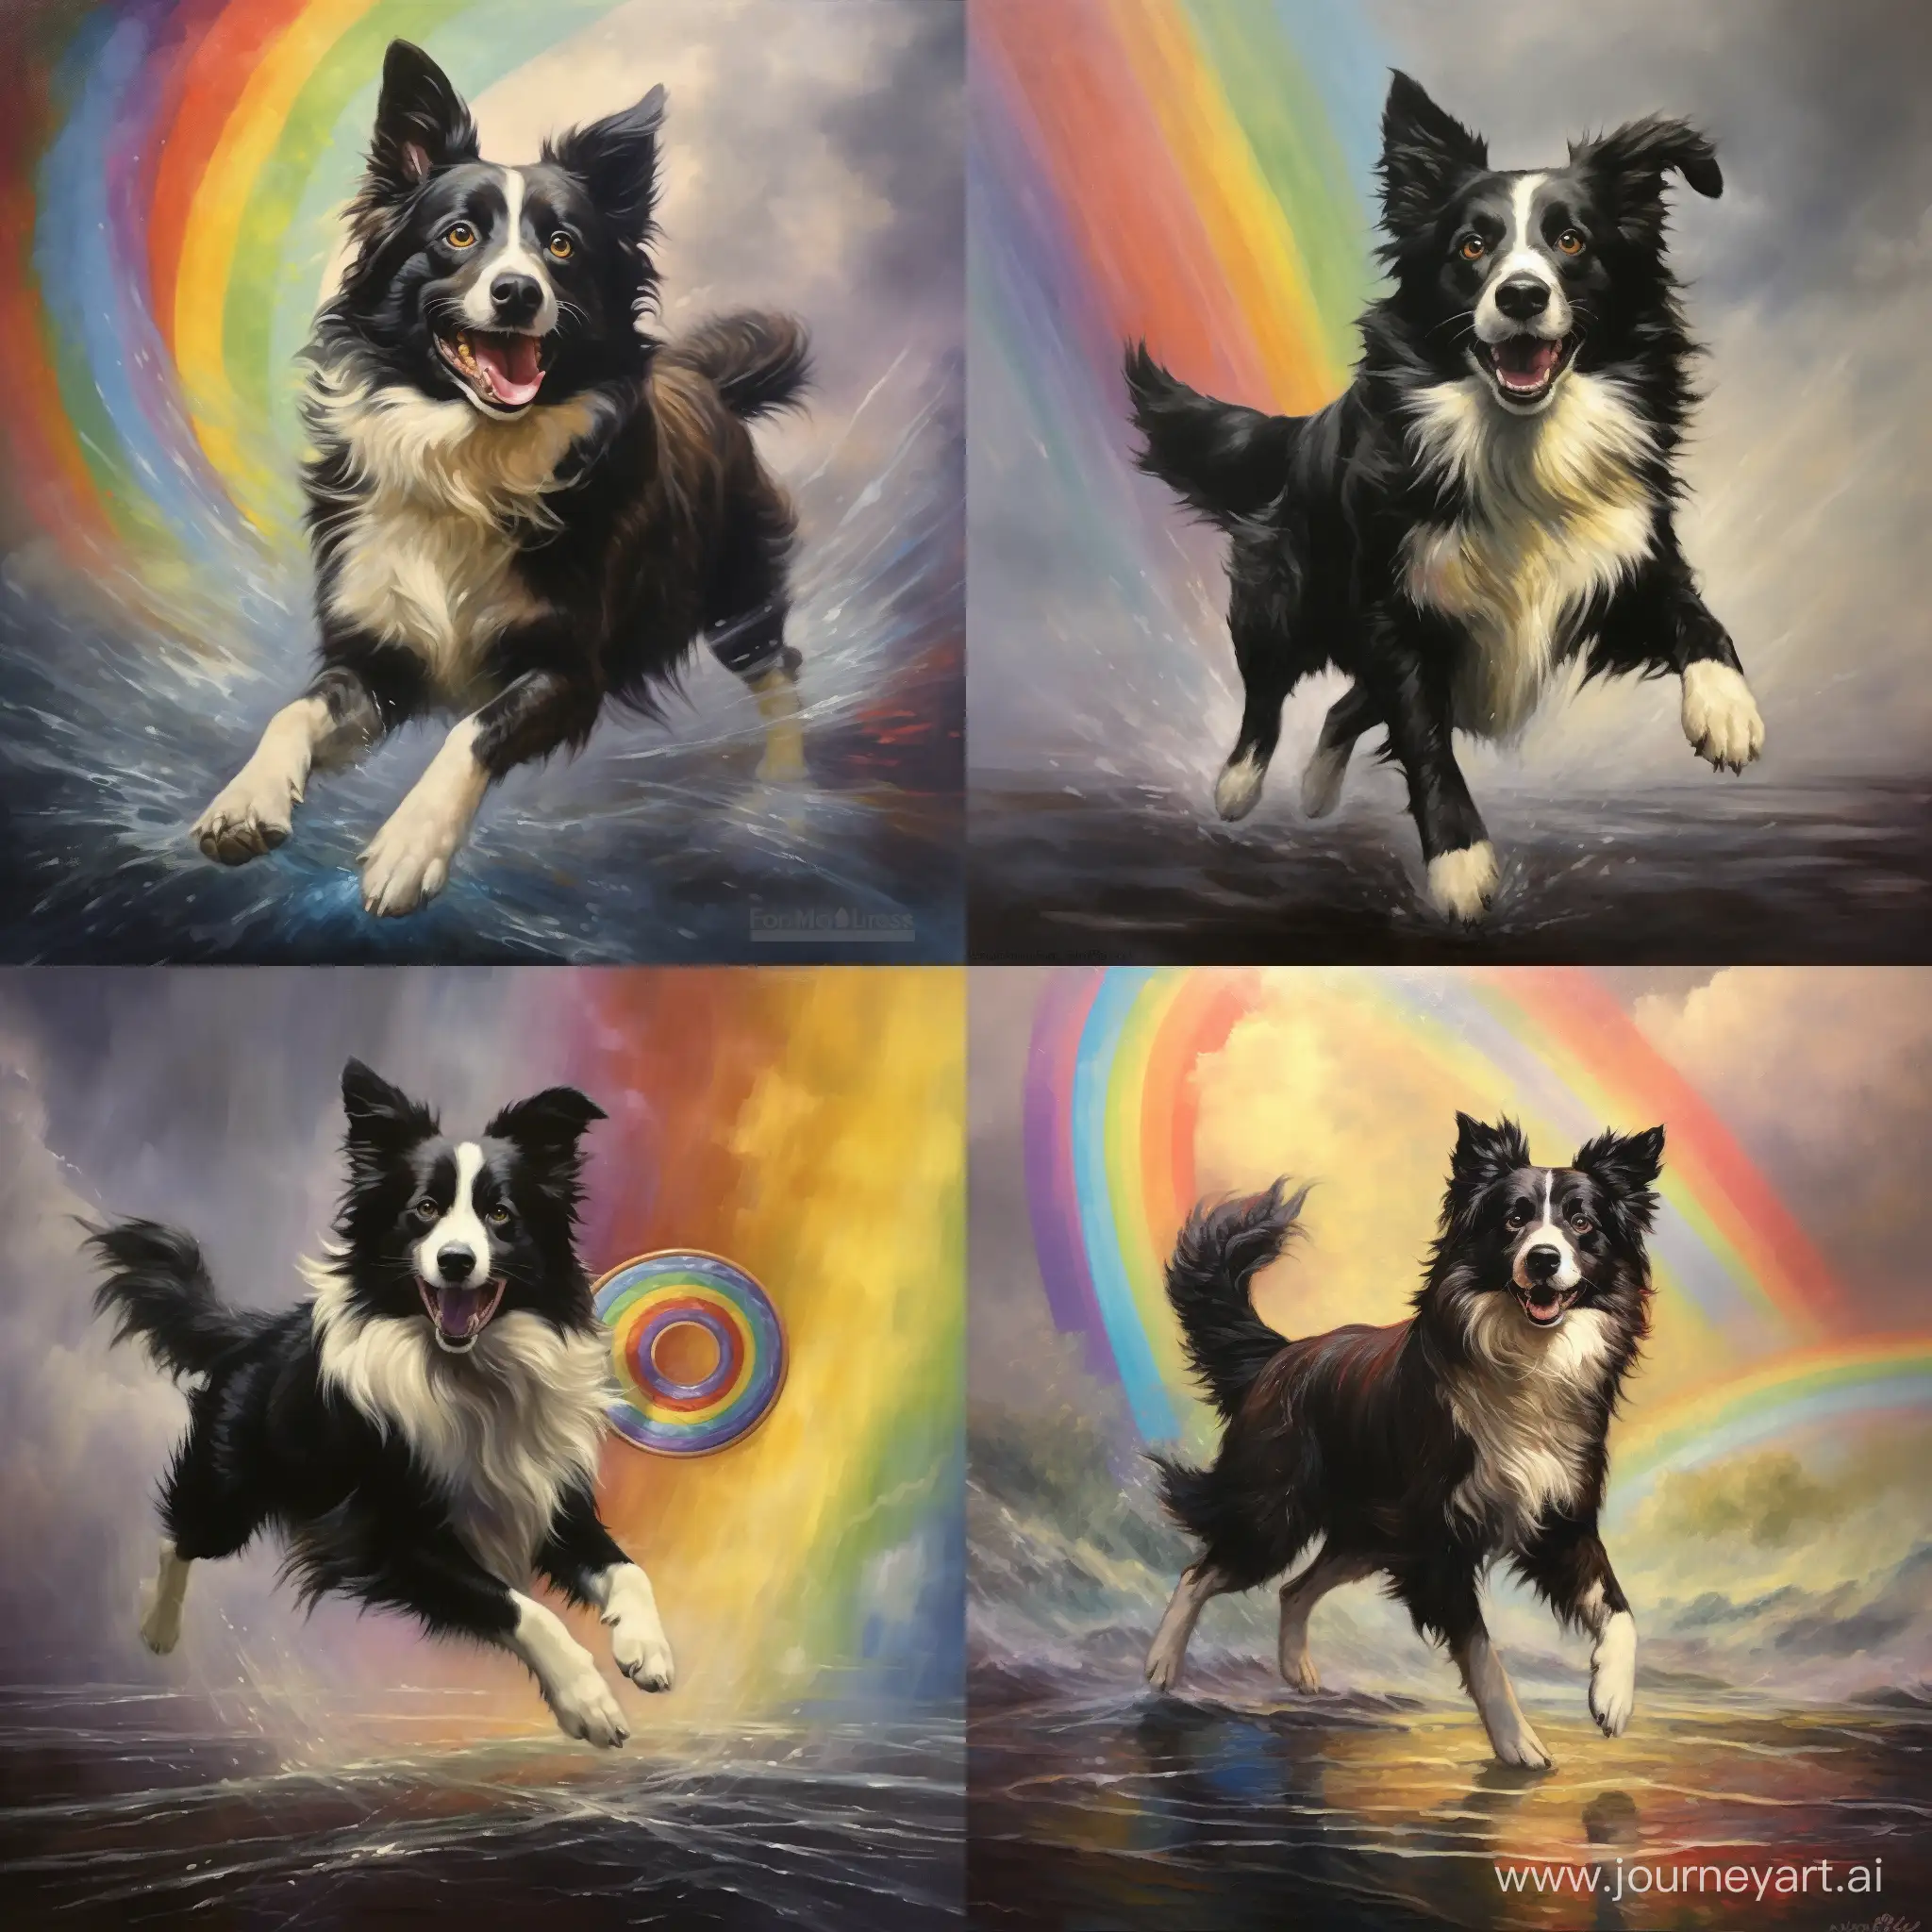 Energetic-Border-Collie-Playing-Frisbee-in-Rain-with-Airborne-Rainbow